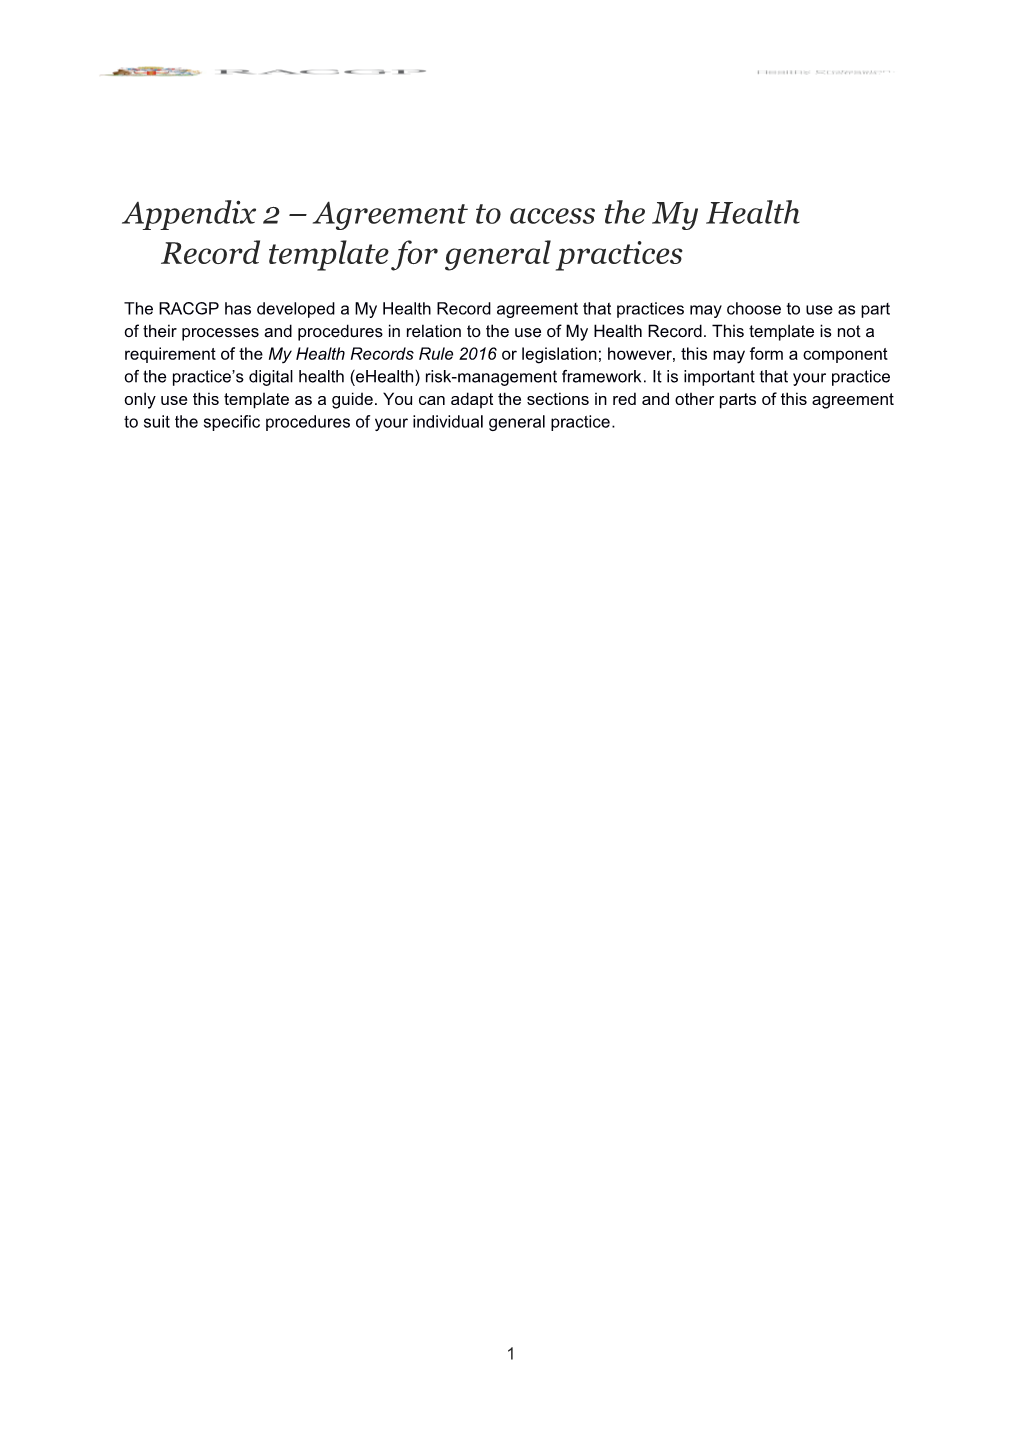 Appendix 2 Agreement to Access the My Health Record Template for General Practices